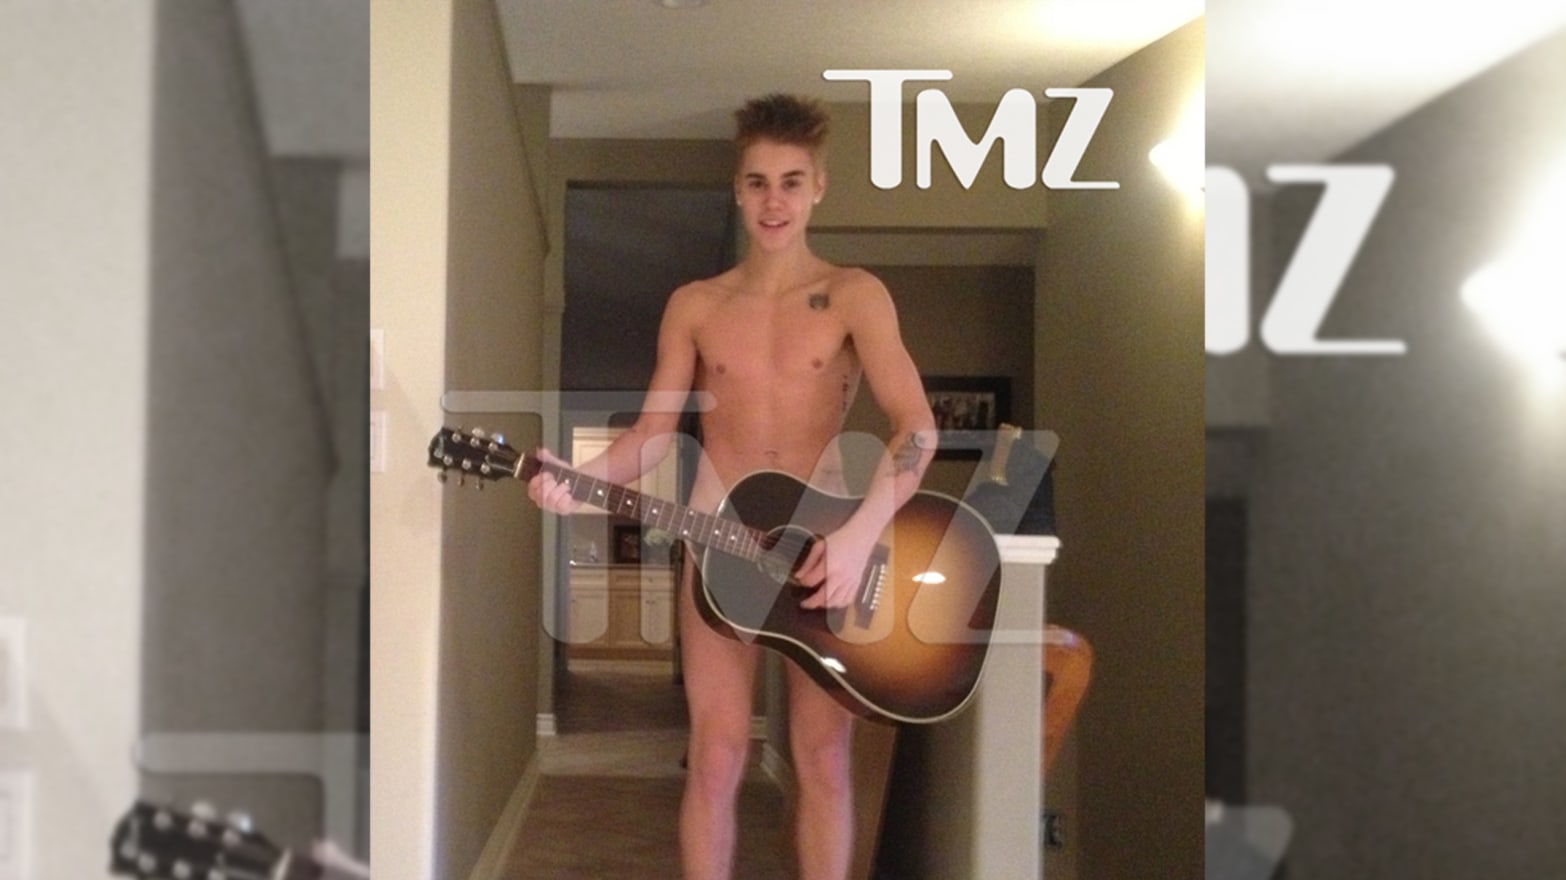 amr mohammed mohammed add photo justin bieber leaked nude photos